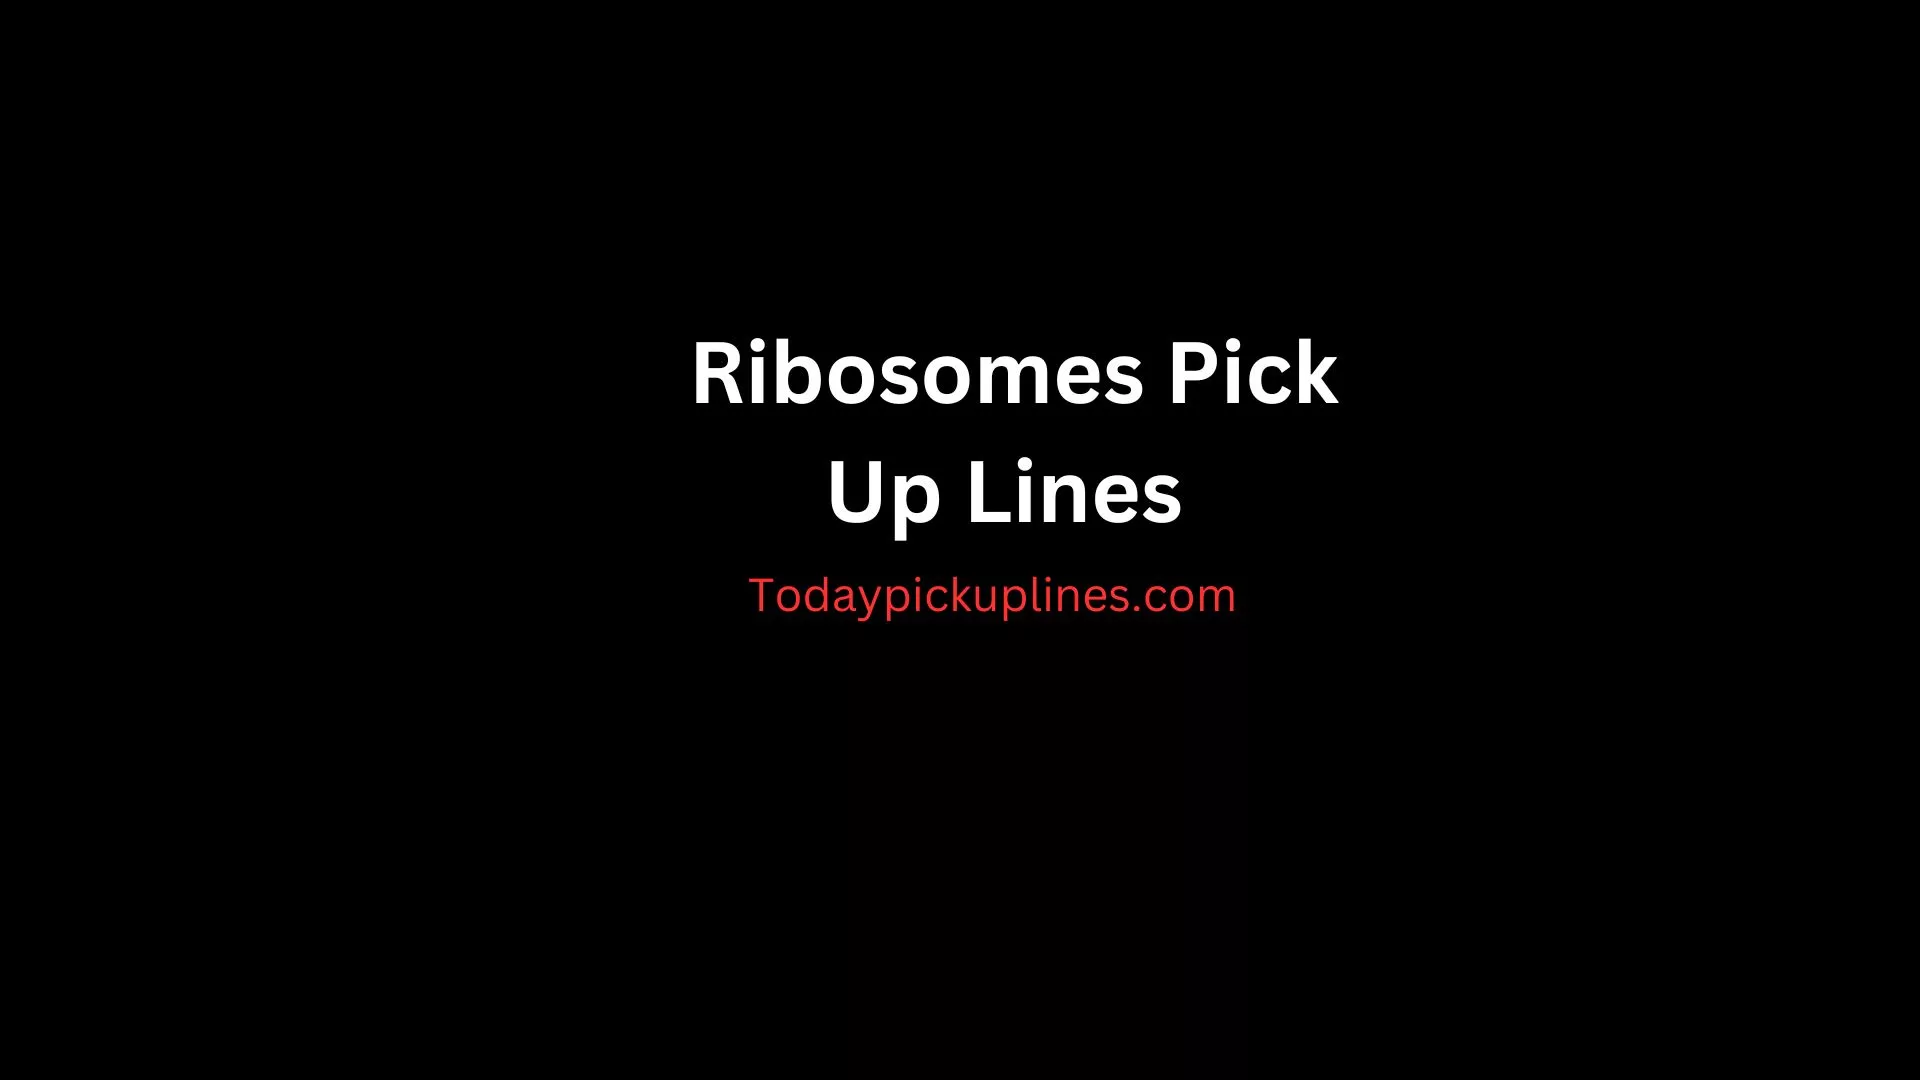 Ribosomes Pick Up Lines